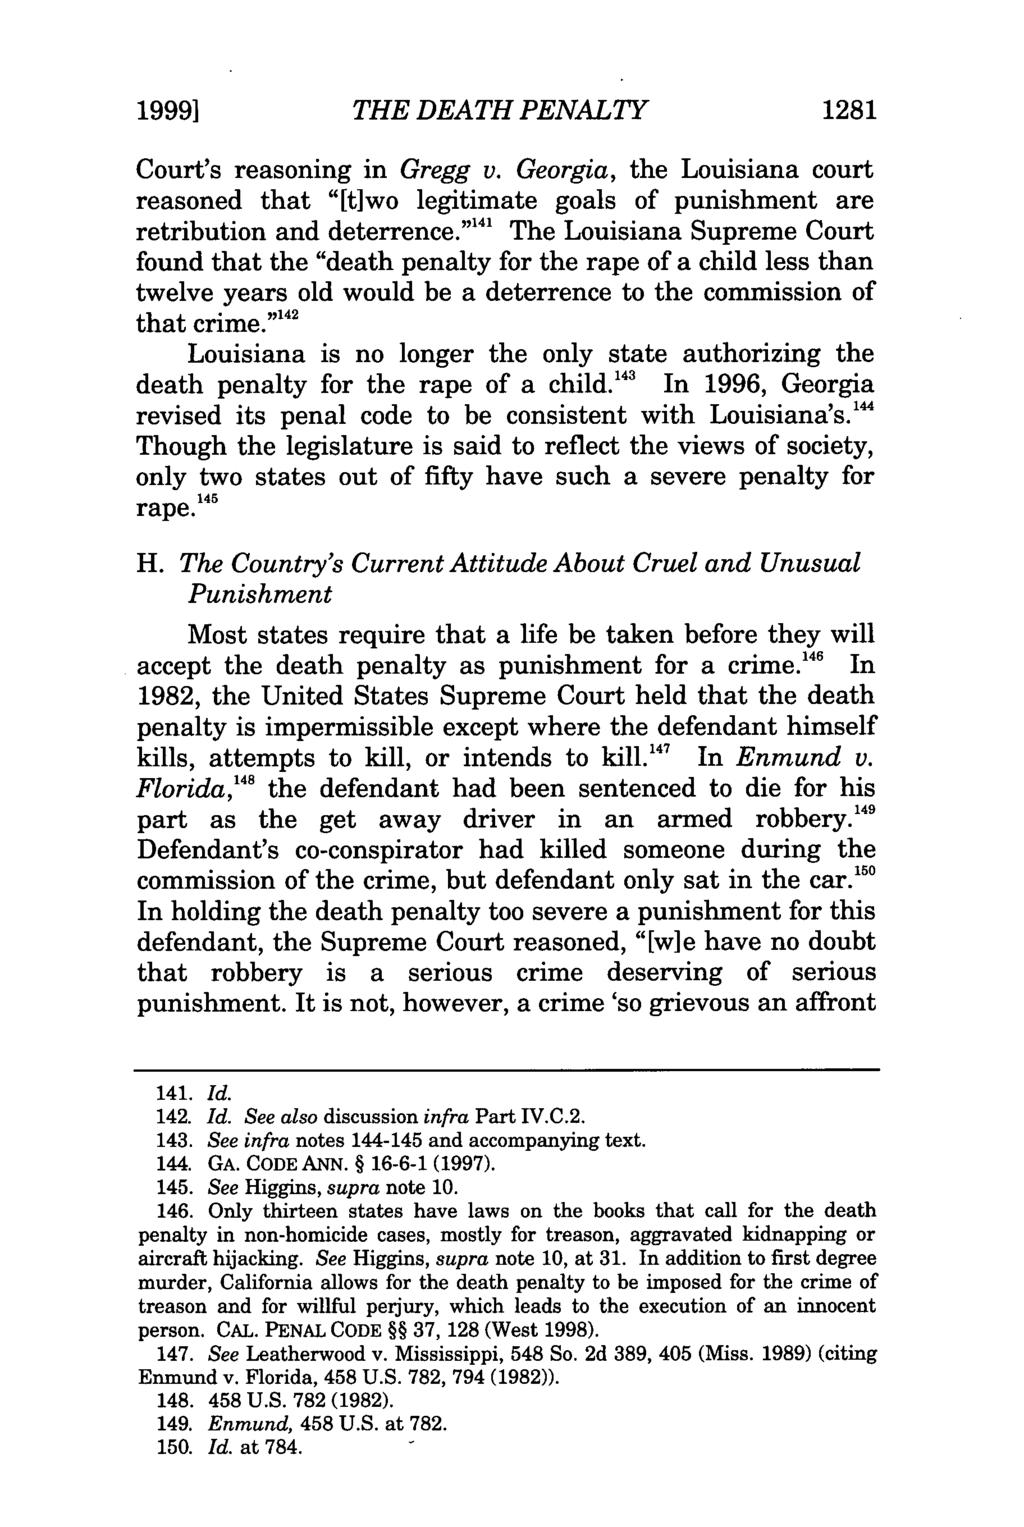 1999] THE DEATH PENALTY 1281 Court's reasoning in Gregg v. Georgia, the Louisiana court reasoned that "[tiwo legitimate goals of punishment are retribution and deterrence.